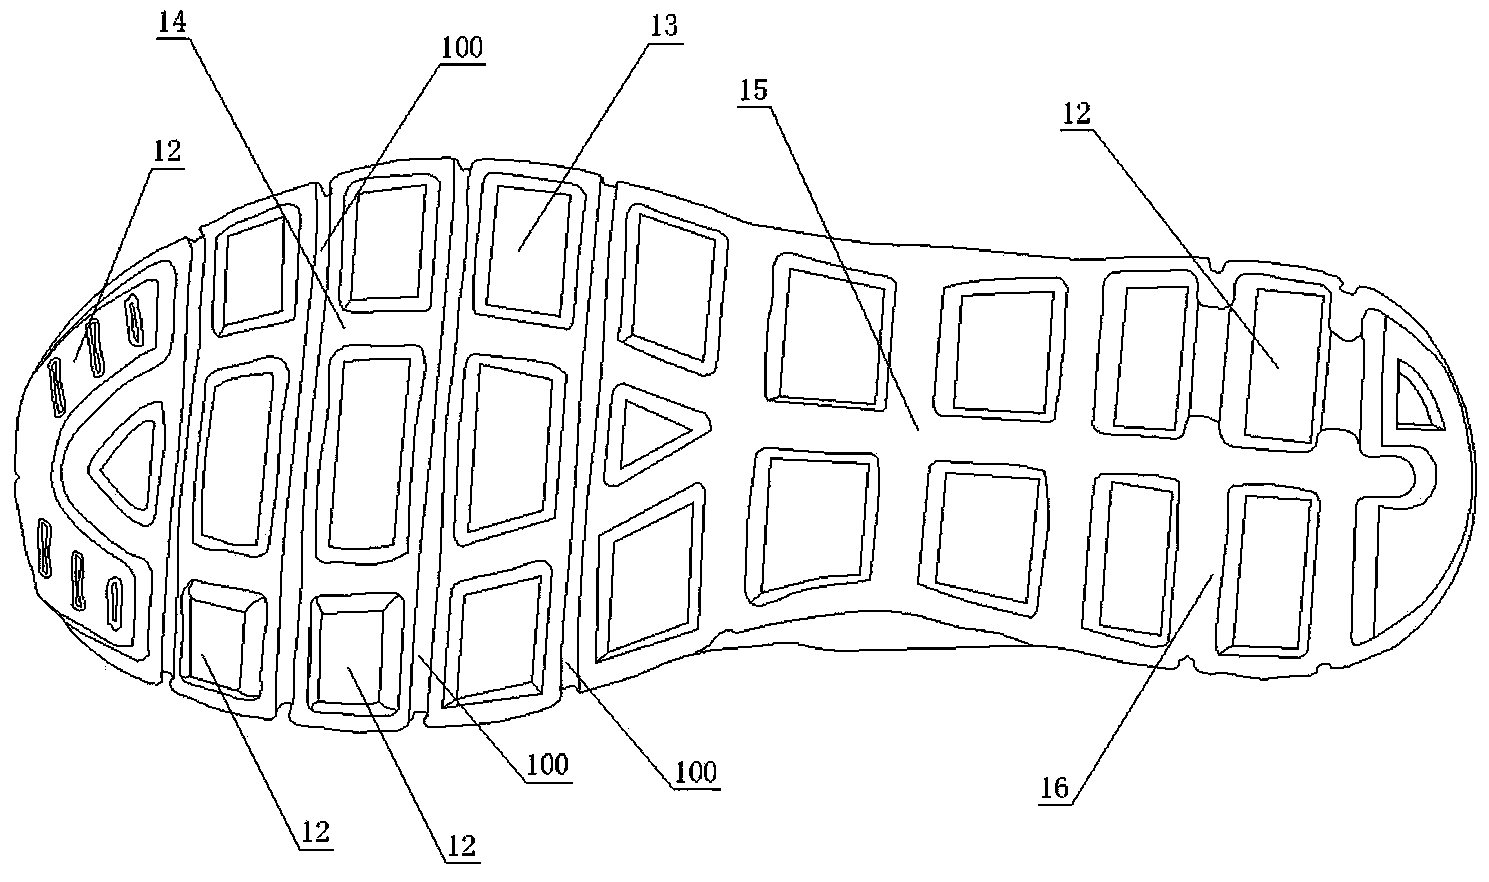 Light running shoe with novel structure